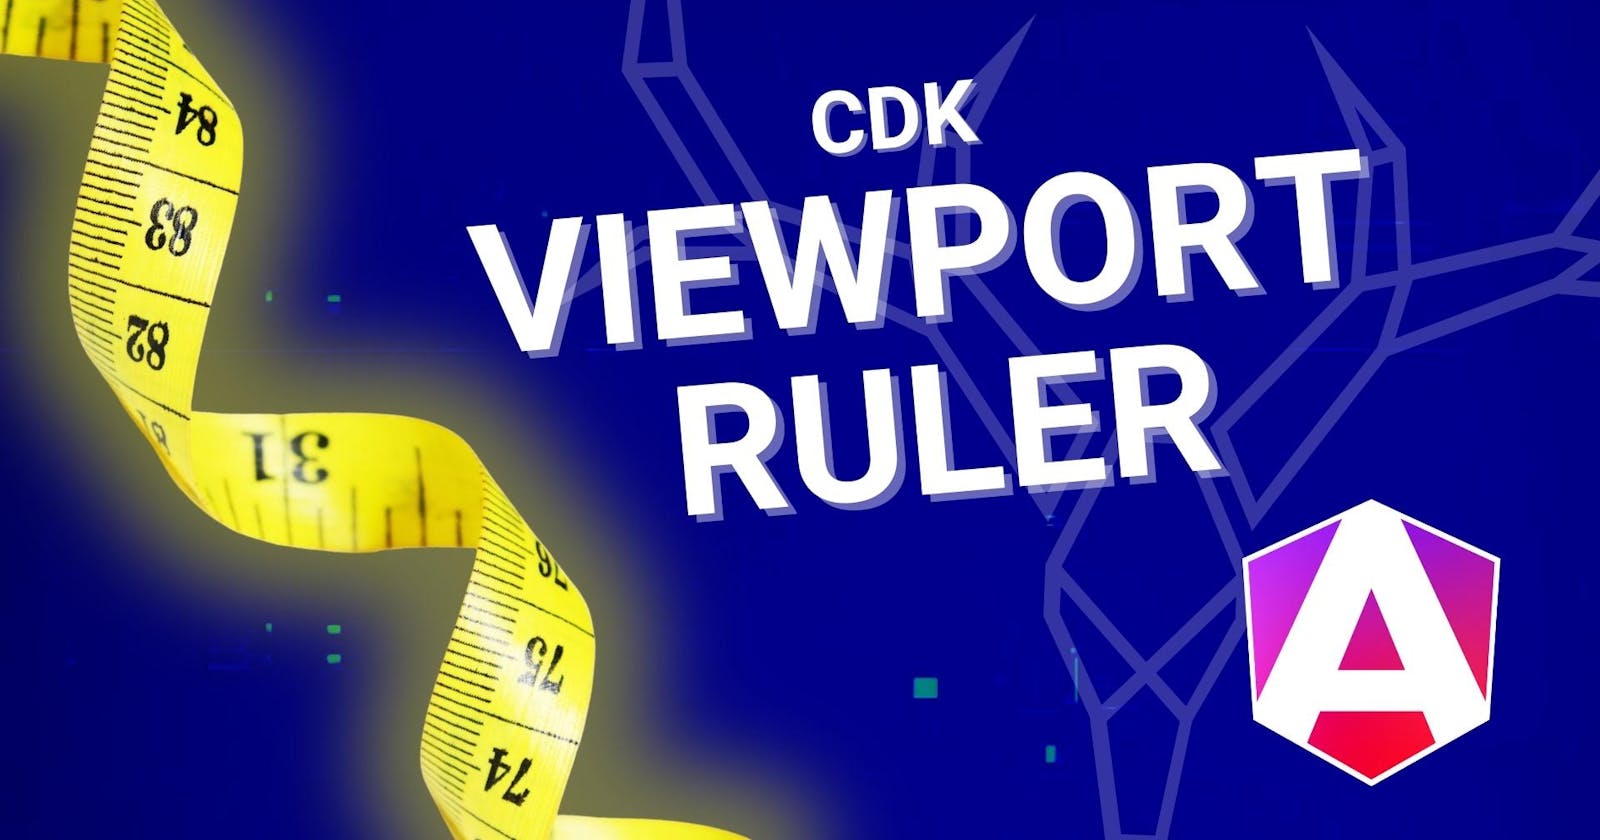 How to Use the Angular CDK Viewport Ruler for Responsive Apps